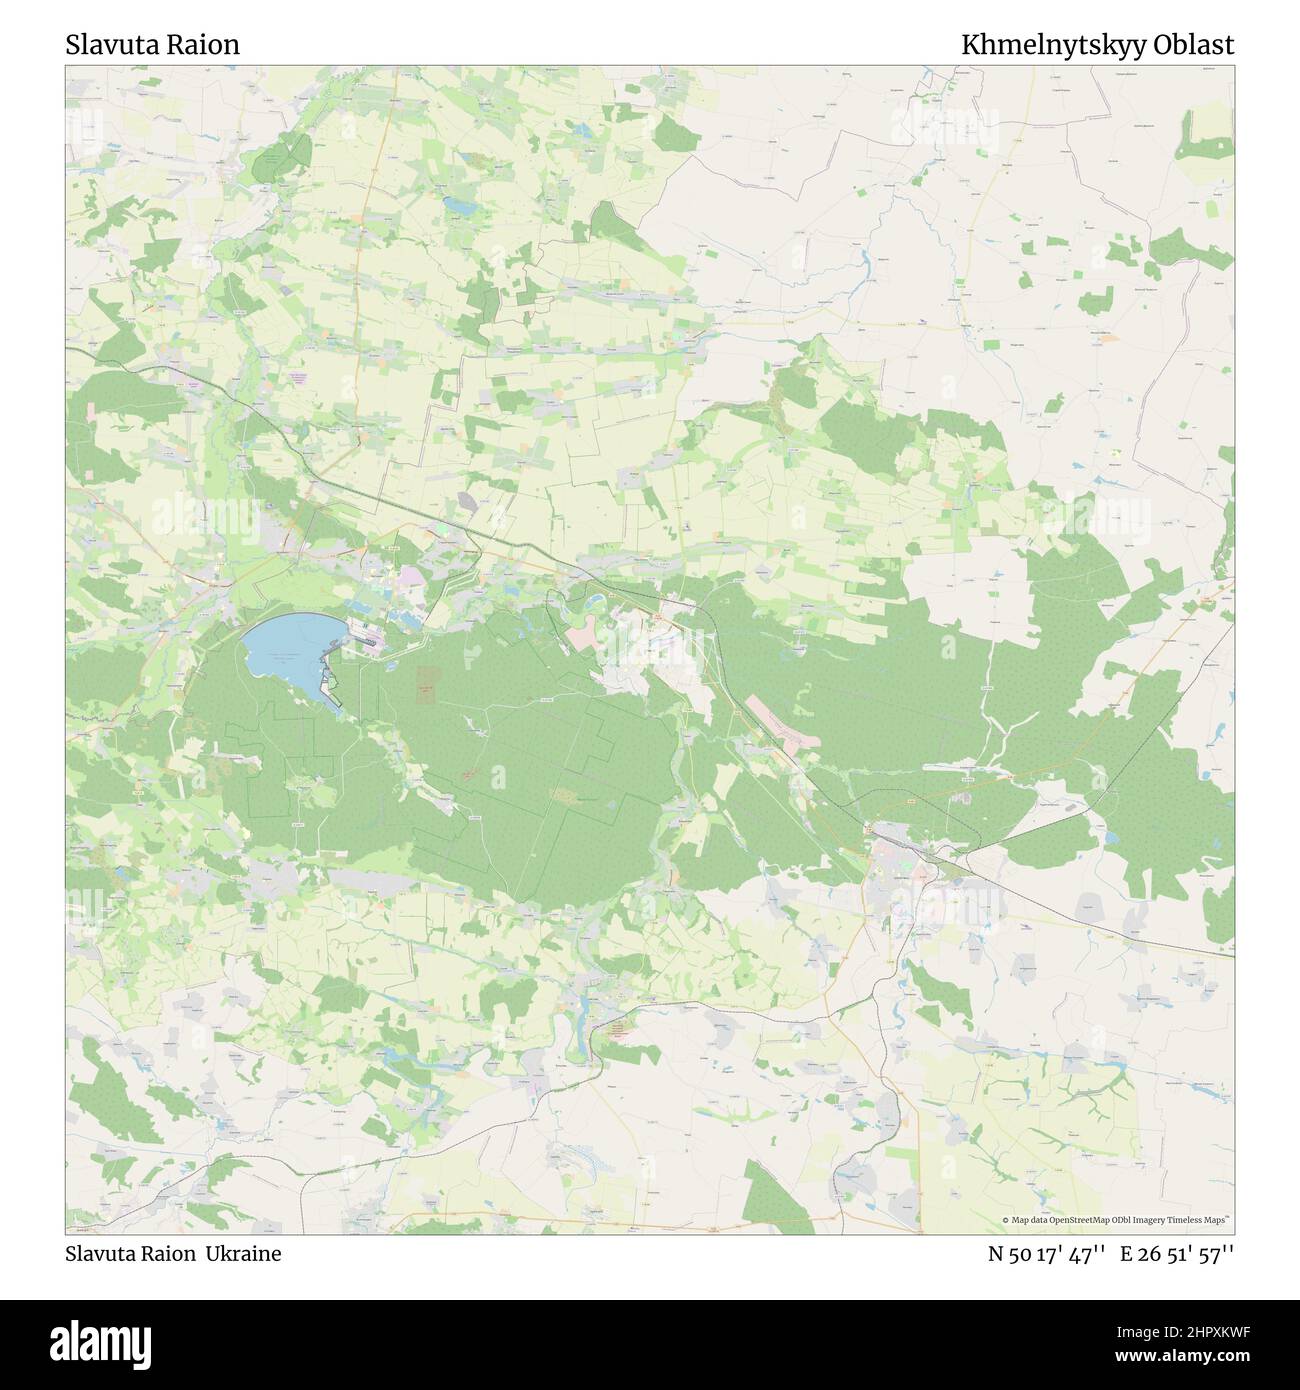 Slavuta Raion, Slavuta Raion, Ukraine, Khmelnytskyy Oblast, N 50 17' 47'', E 26 51' 57'', map, Timeless Map published in 2021. Travelers, explorers and adventurers like Florence Nightingale, David Livingstone, Ernest Shackleton, Lewis and Clark and Sherlock Holmes relied on maps to plan travels to the world's most remote corners, Timeless Maps is mapping most locations on the globe, showing the achievement of great dreams Stock Photo